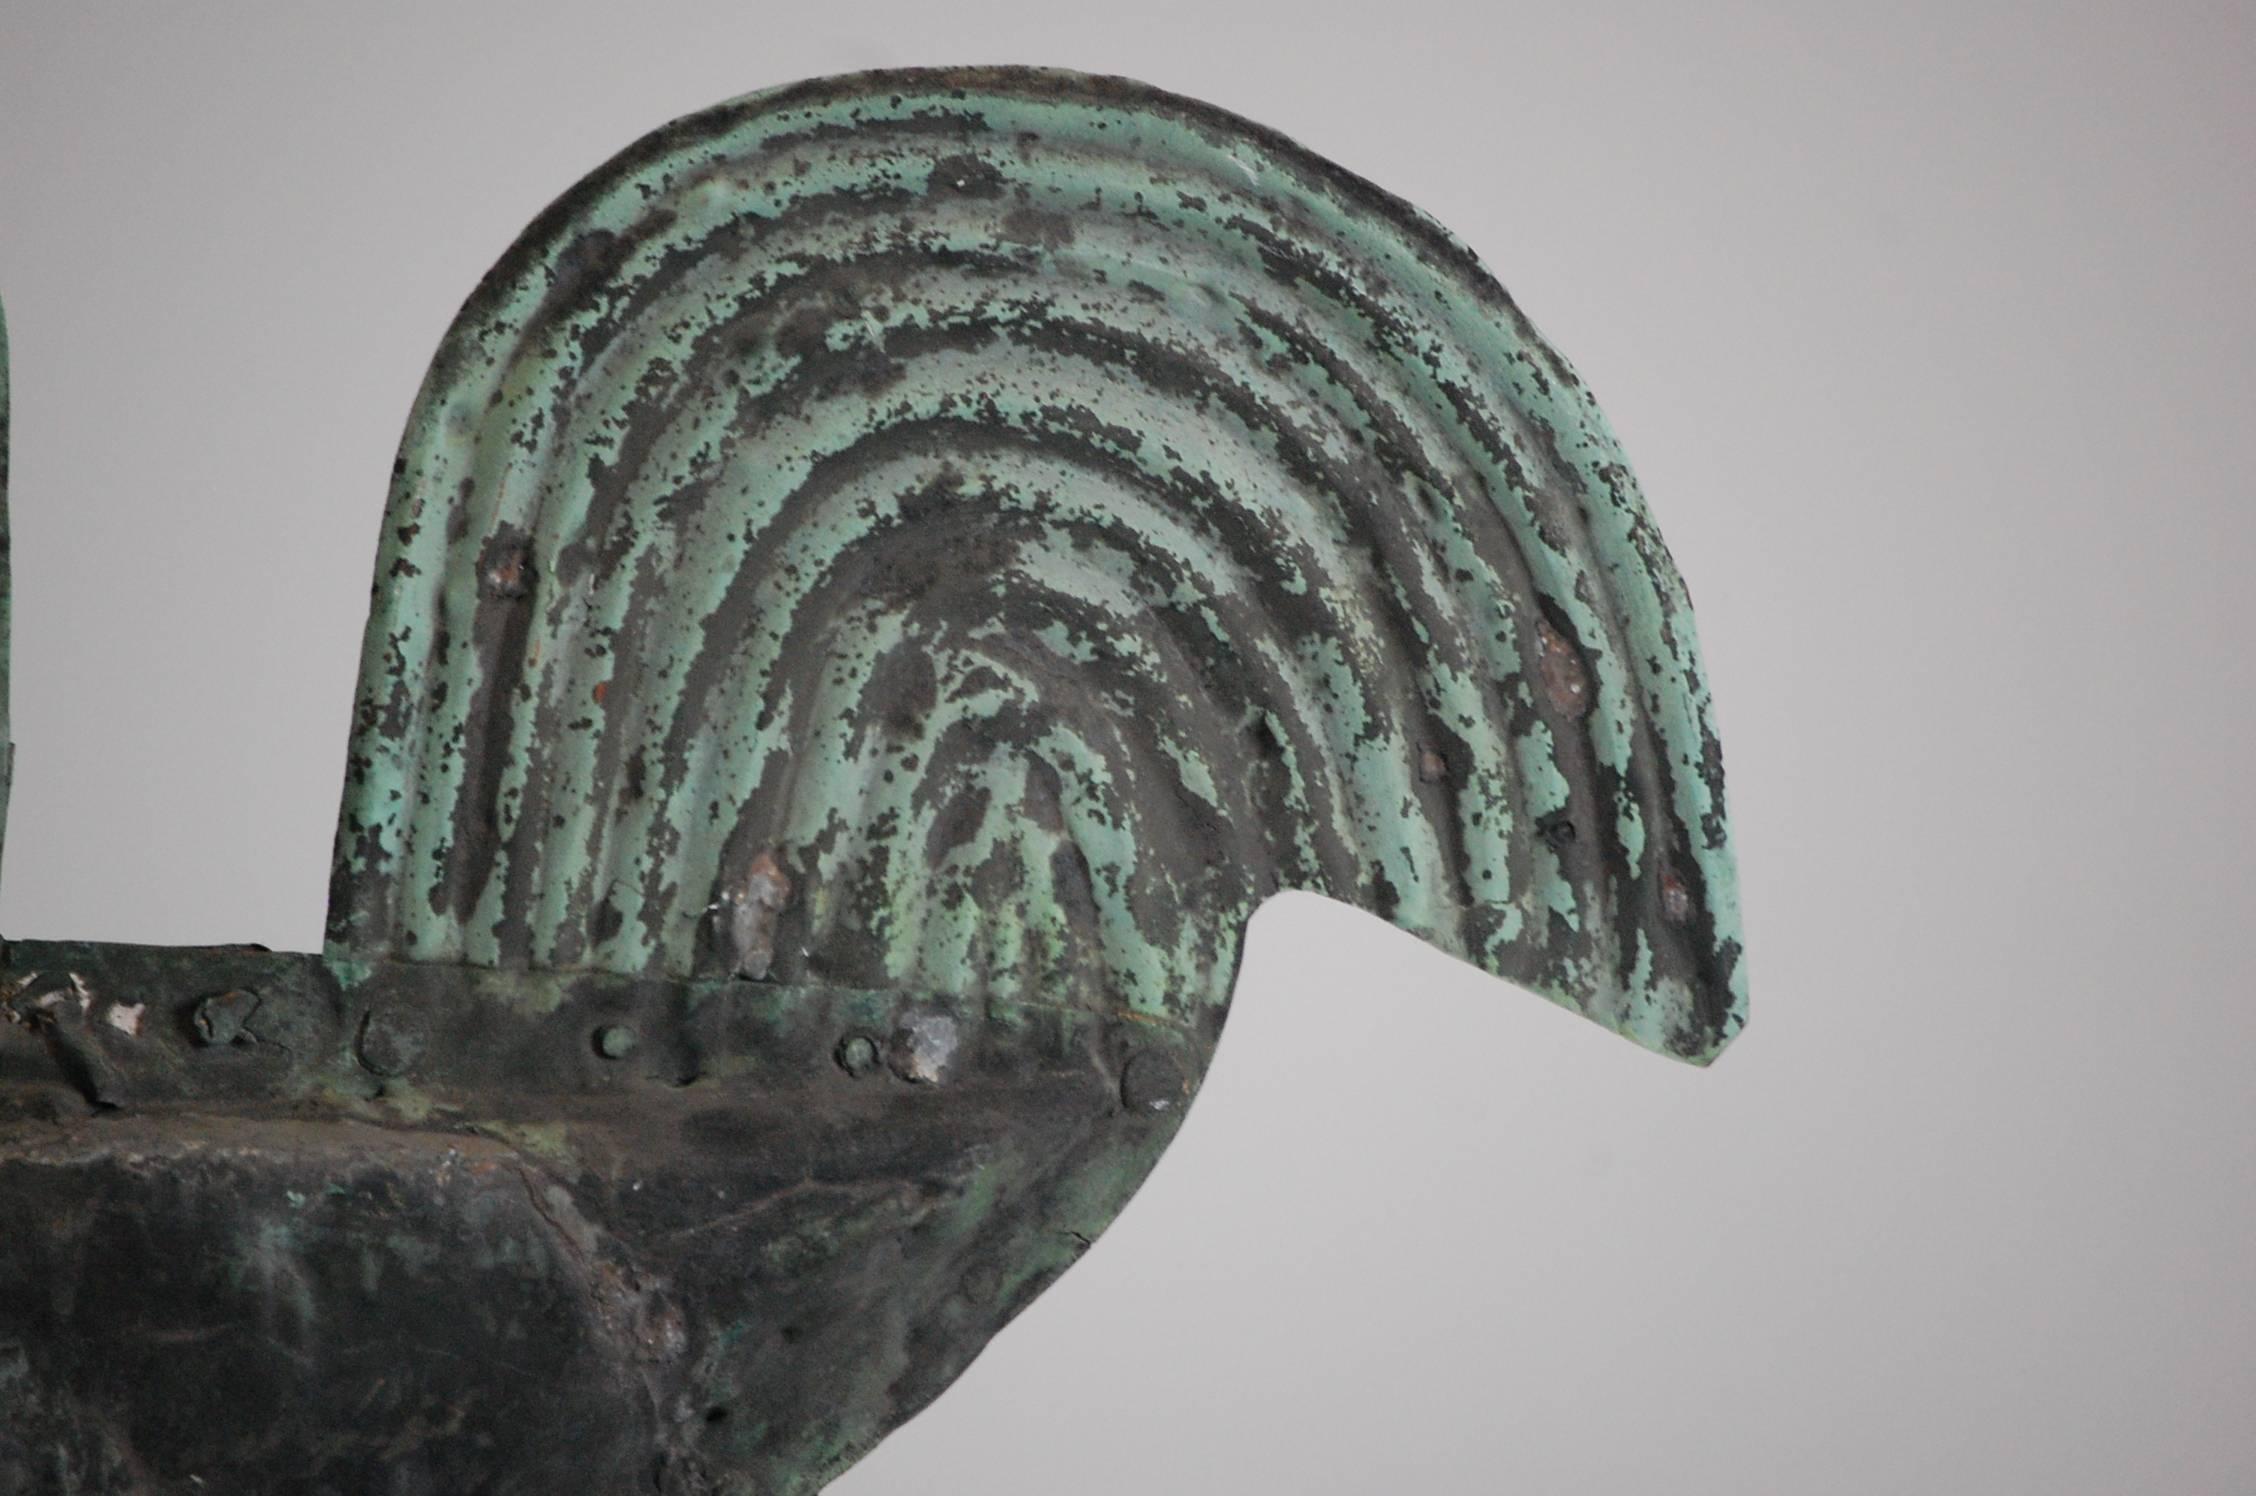 Early 19th century stylised full bodied cockerel weathervane, bulbous body and charmingly oversized head, stylised tail and comb. Wonderful patinated surface, with natural verdigris, evidence of period working repairs. Great example of authentic